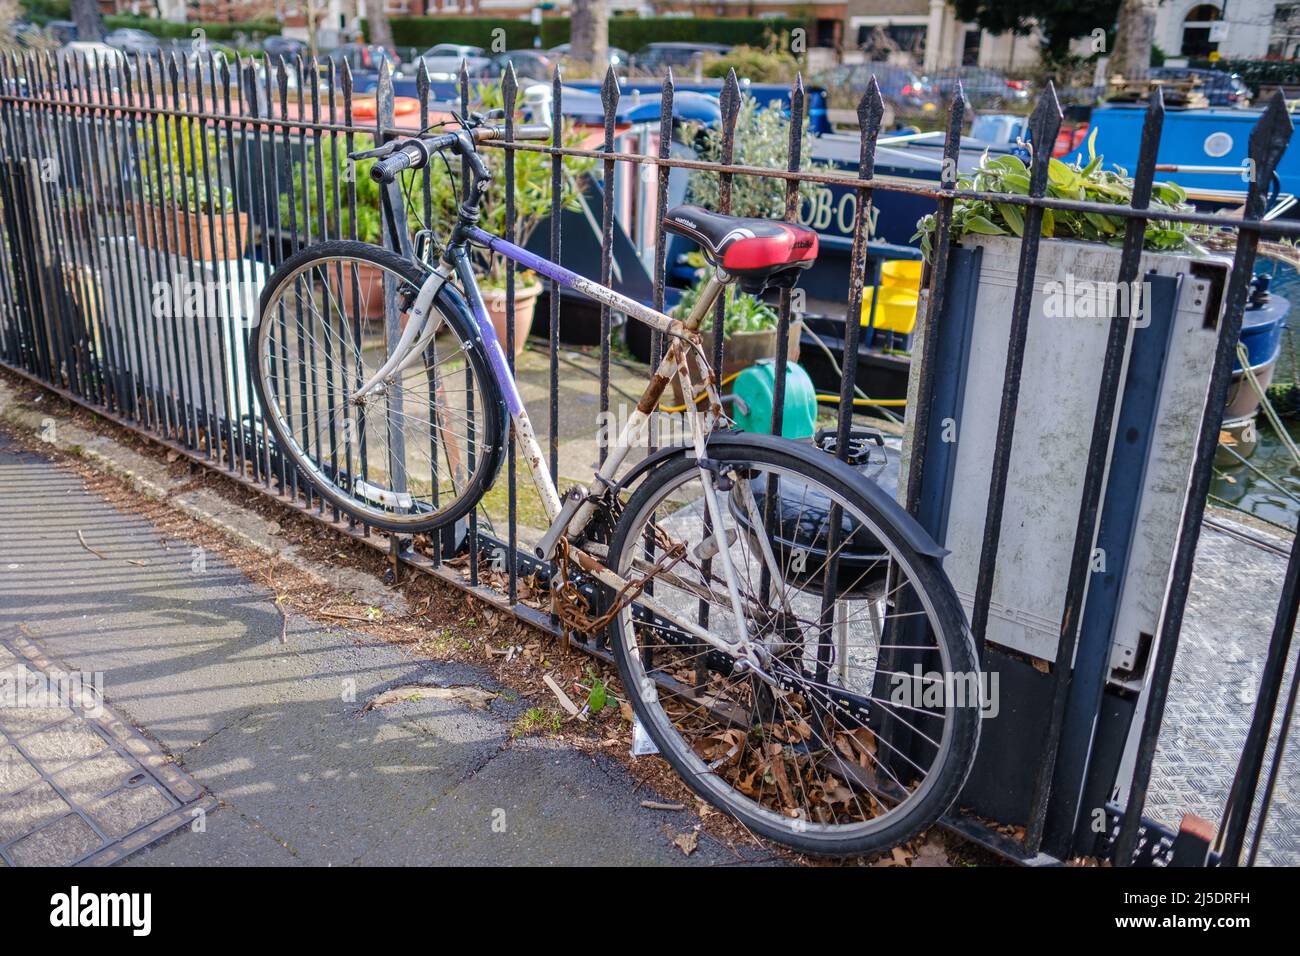 A man’s bicycle chained to the fence at Blomfield Rd. next to Regent’s Canal, Little Venice, London, England. Narrowboats & houses in background. Stock Photo